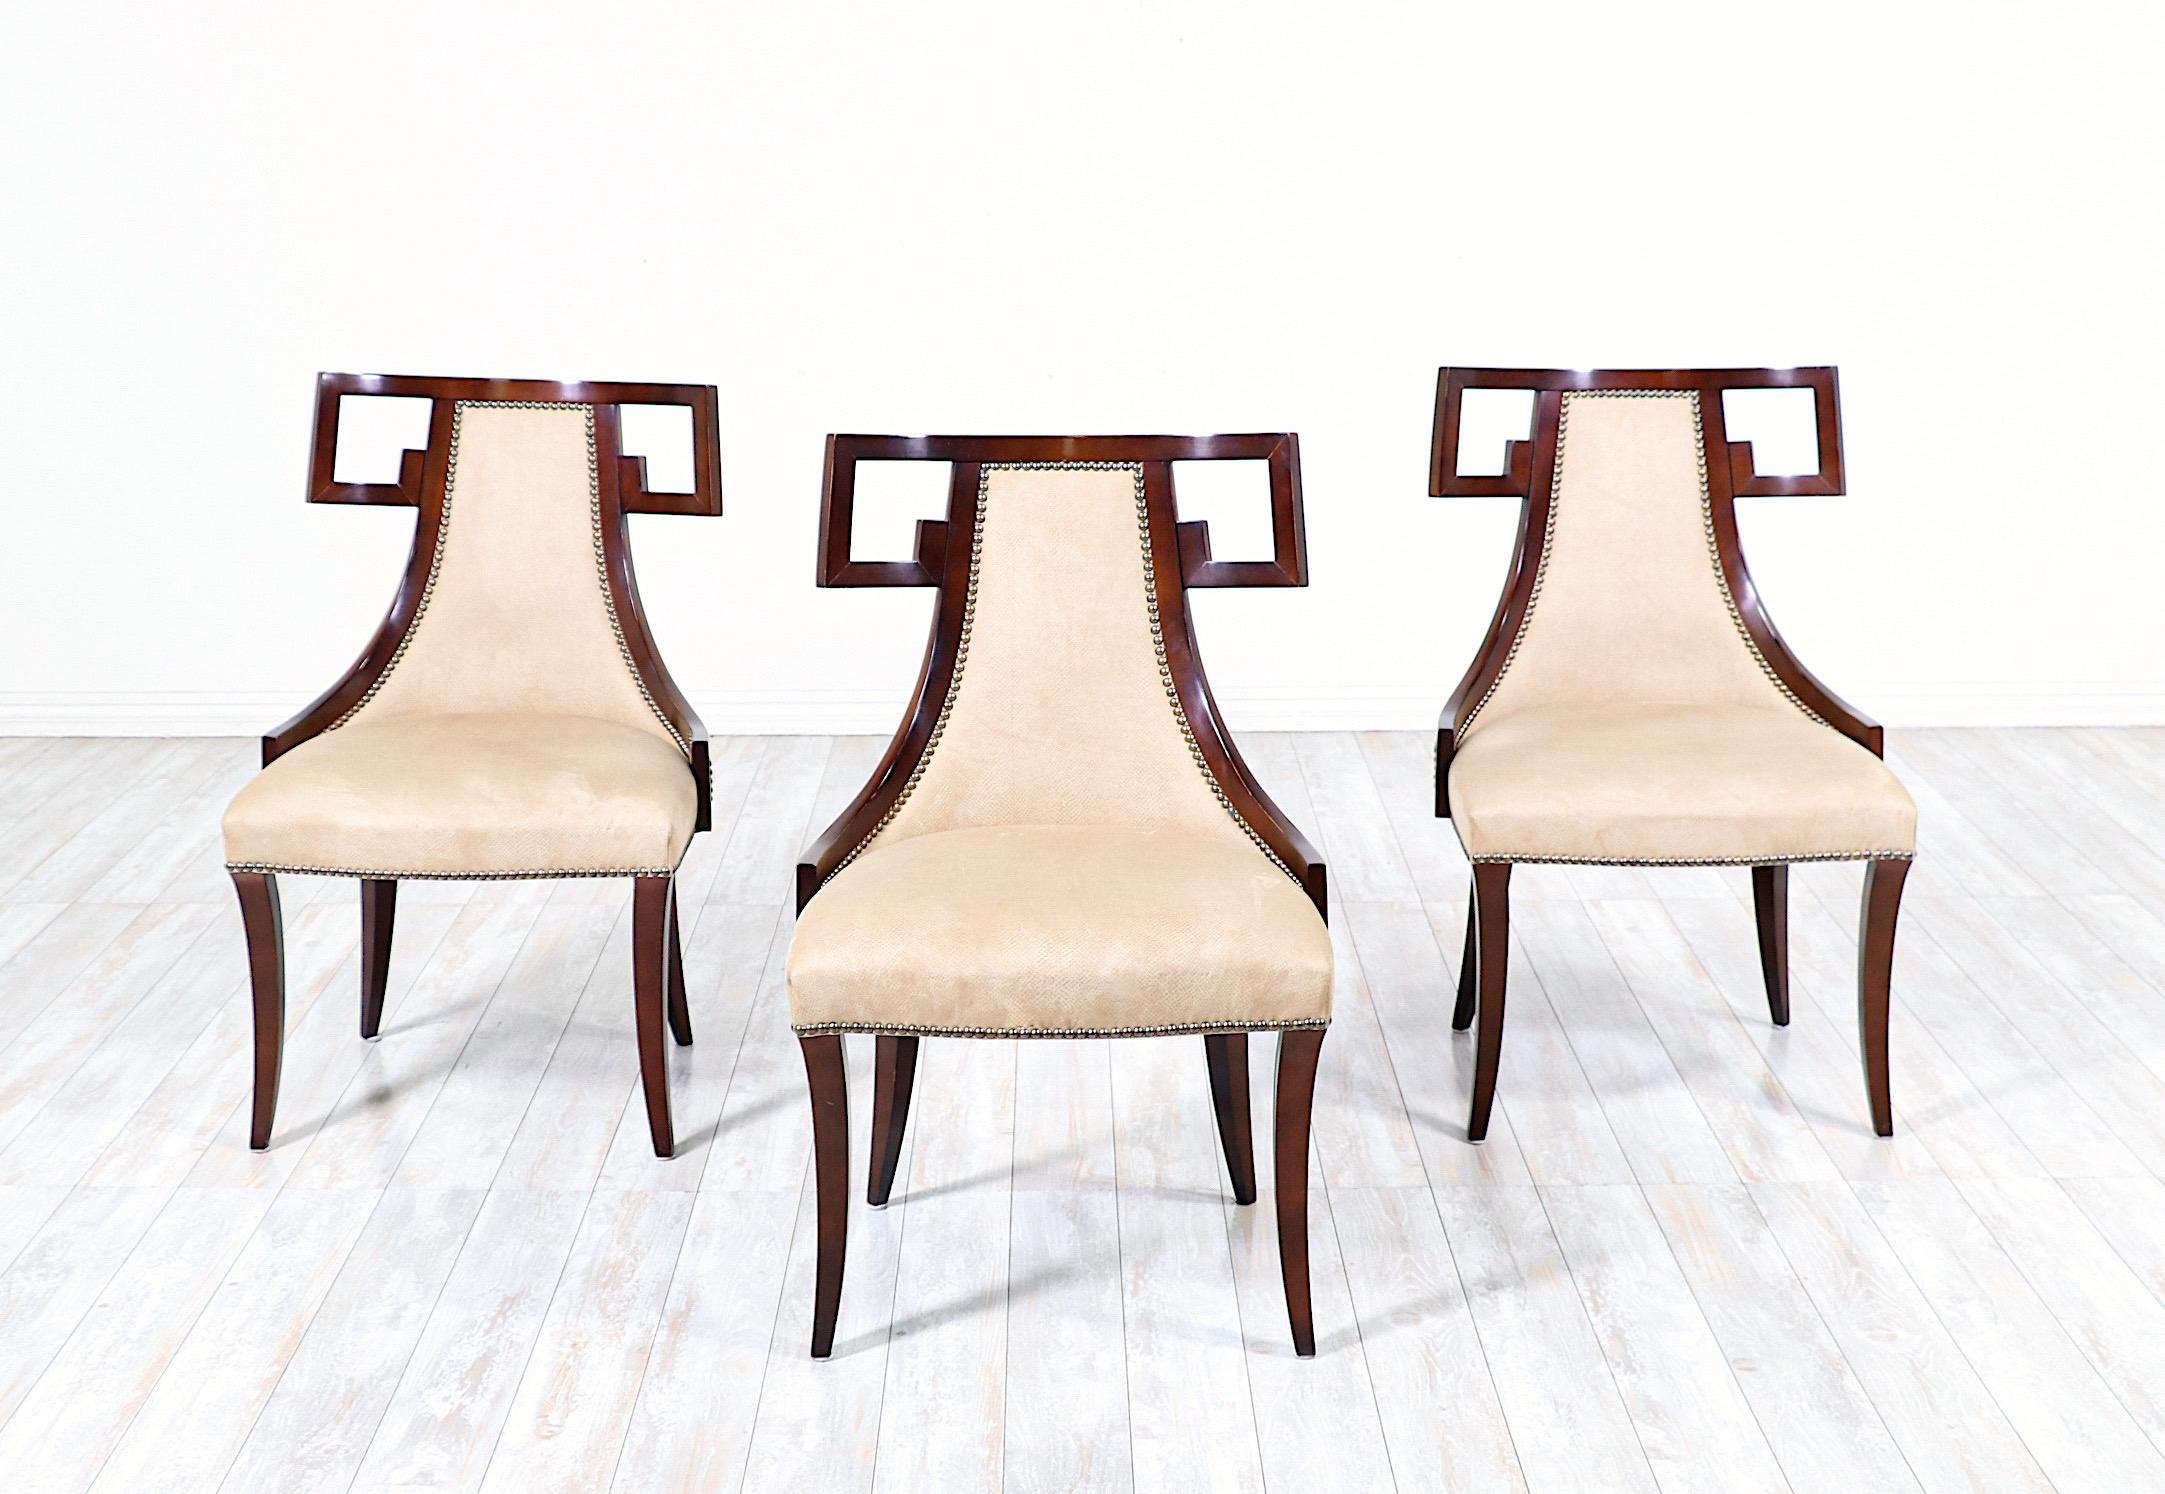 Fantastic, set of 4 “Greek” dining chairs designed by Thomas Pheasant for Baker Furniture. 

The “Greek” chair, model #7849, features clean, Classic lines inspired by the, timeless in design, Greek klismos chairs of antiquity. 

The chairs